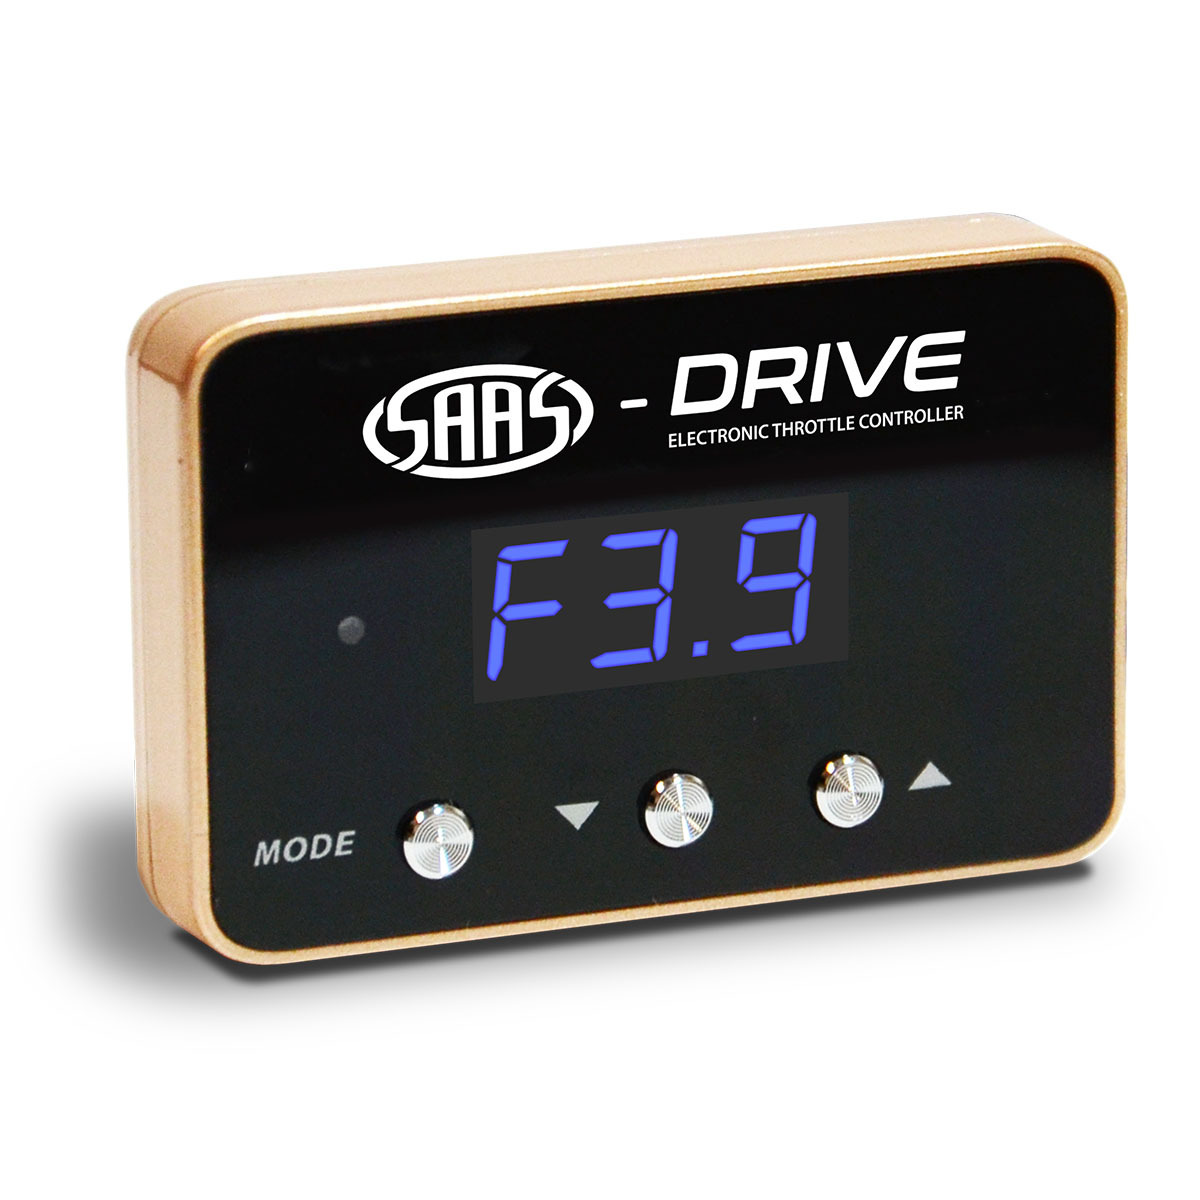 SAAS-Drive JEEP Throttle Controller 